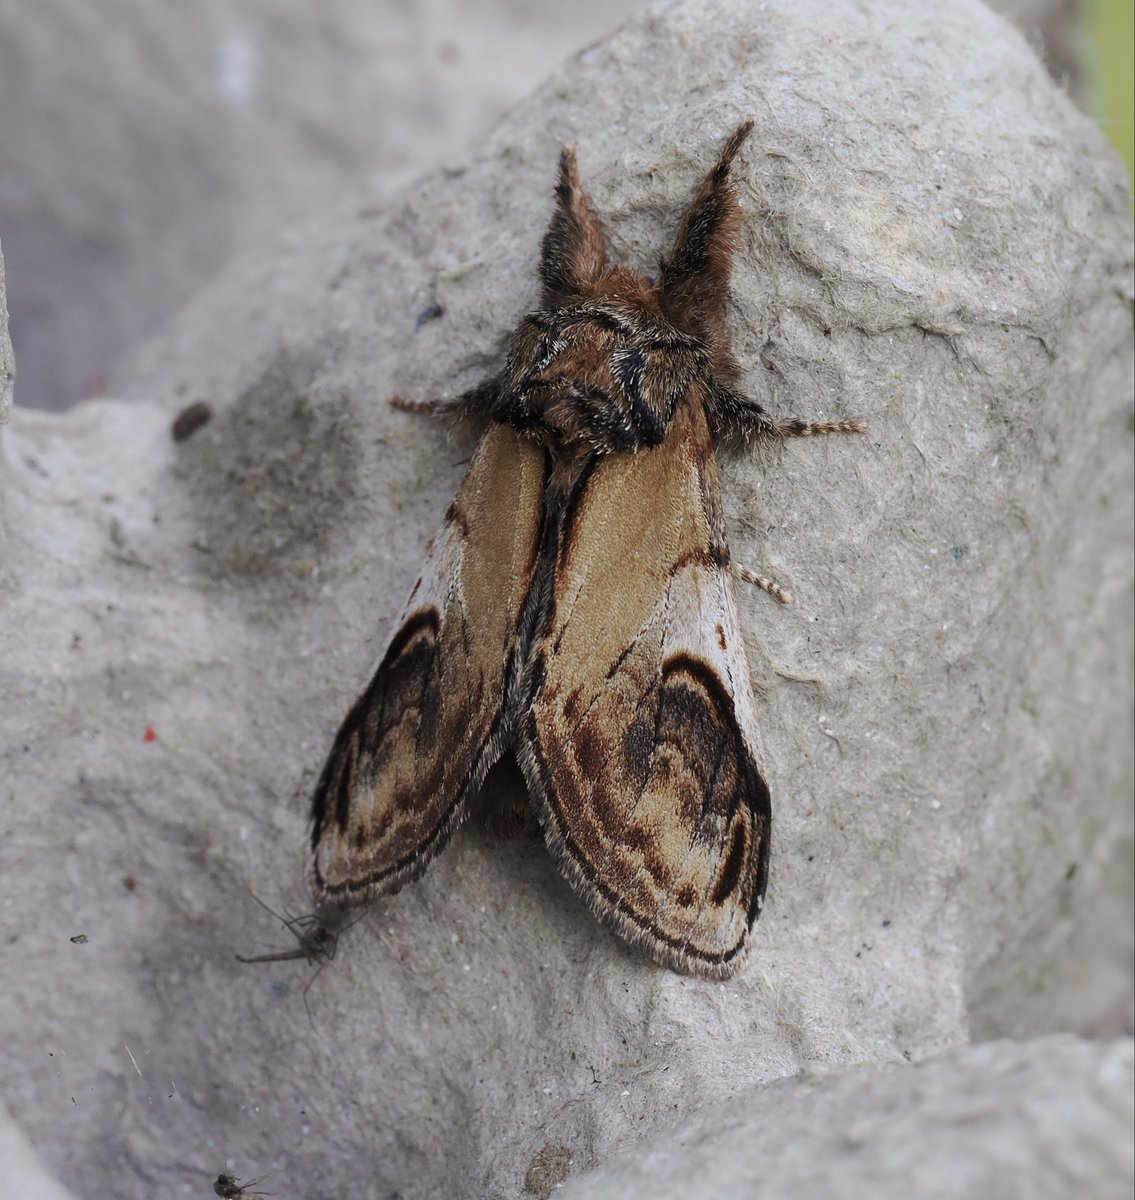 A very early Poplar Hawk-moth this morning, along with pristine Lunar Marbled Brown and Pebble Prominent